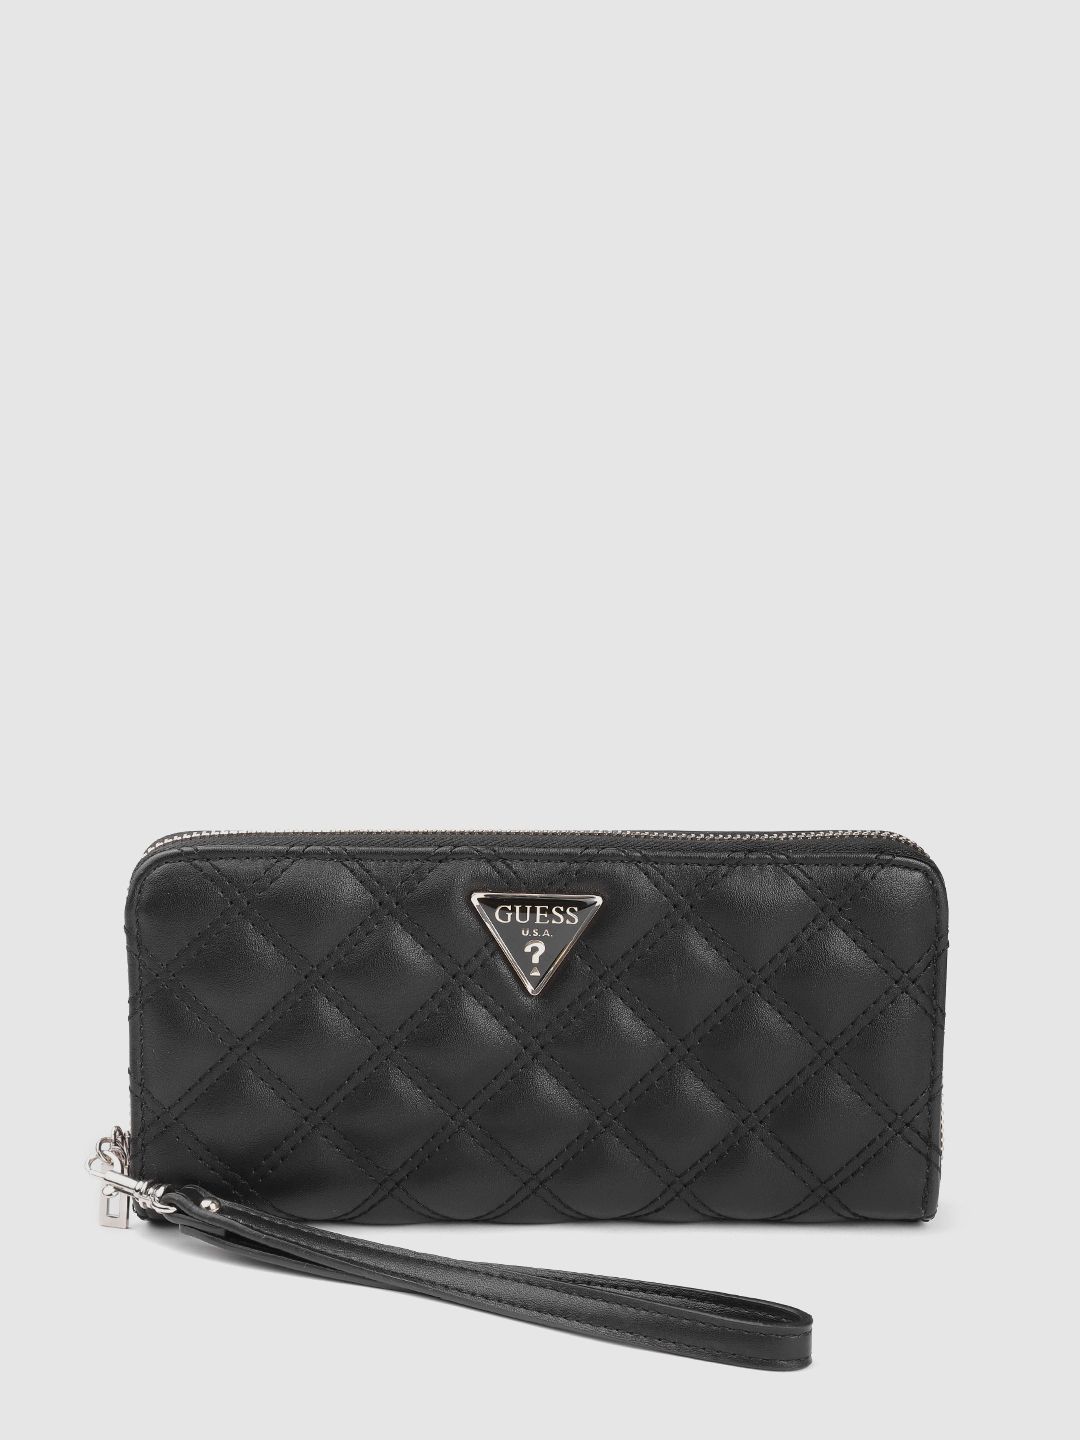 GUESS Women Black Quilted Zip Around Wallet Price in India